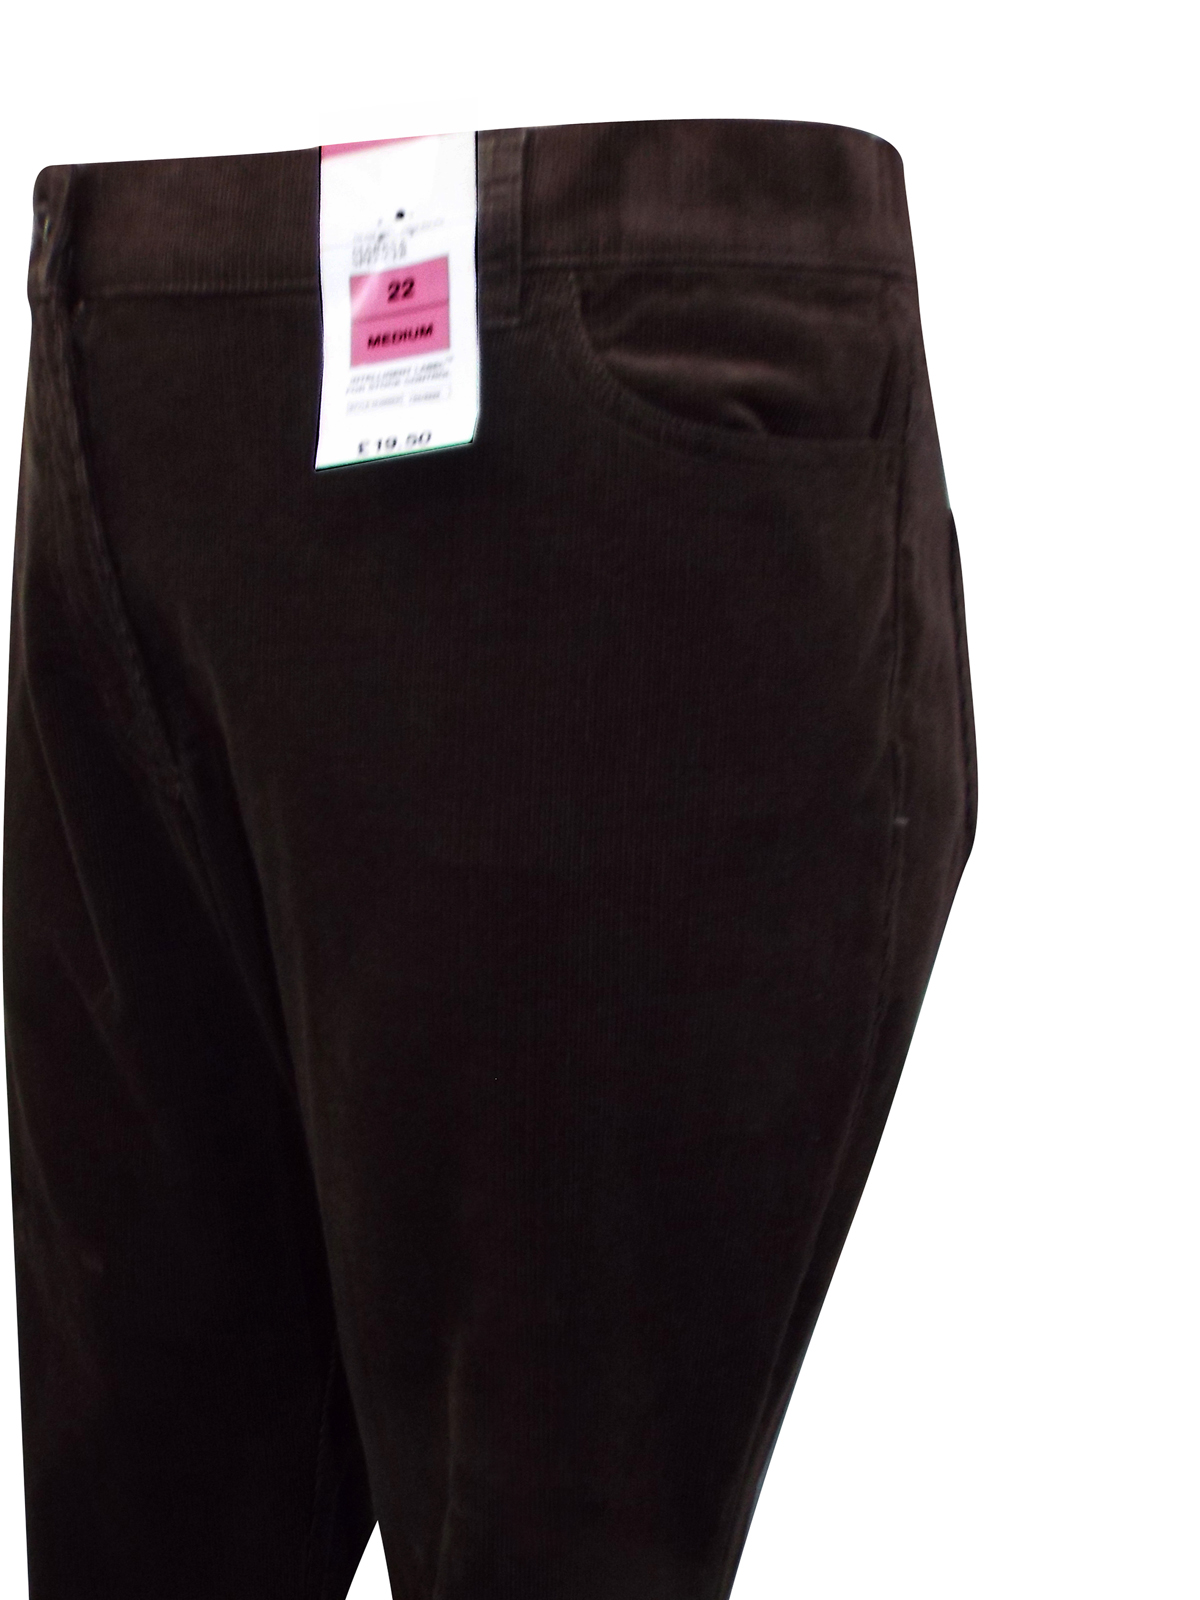 Marks and Spencer - - M&5 BROWN Cotton Rich Cord Straight Leg Trousers